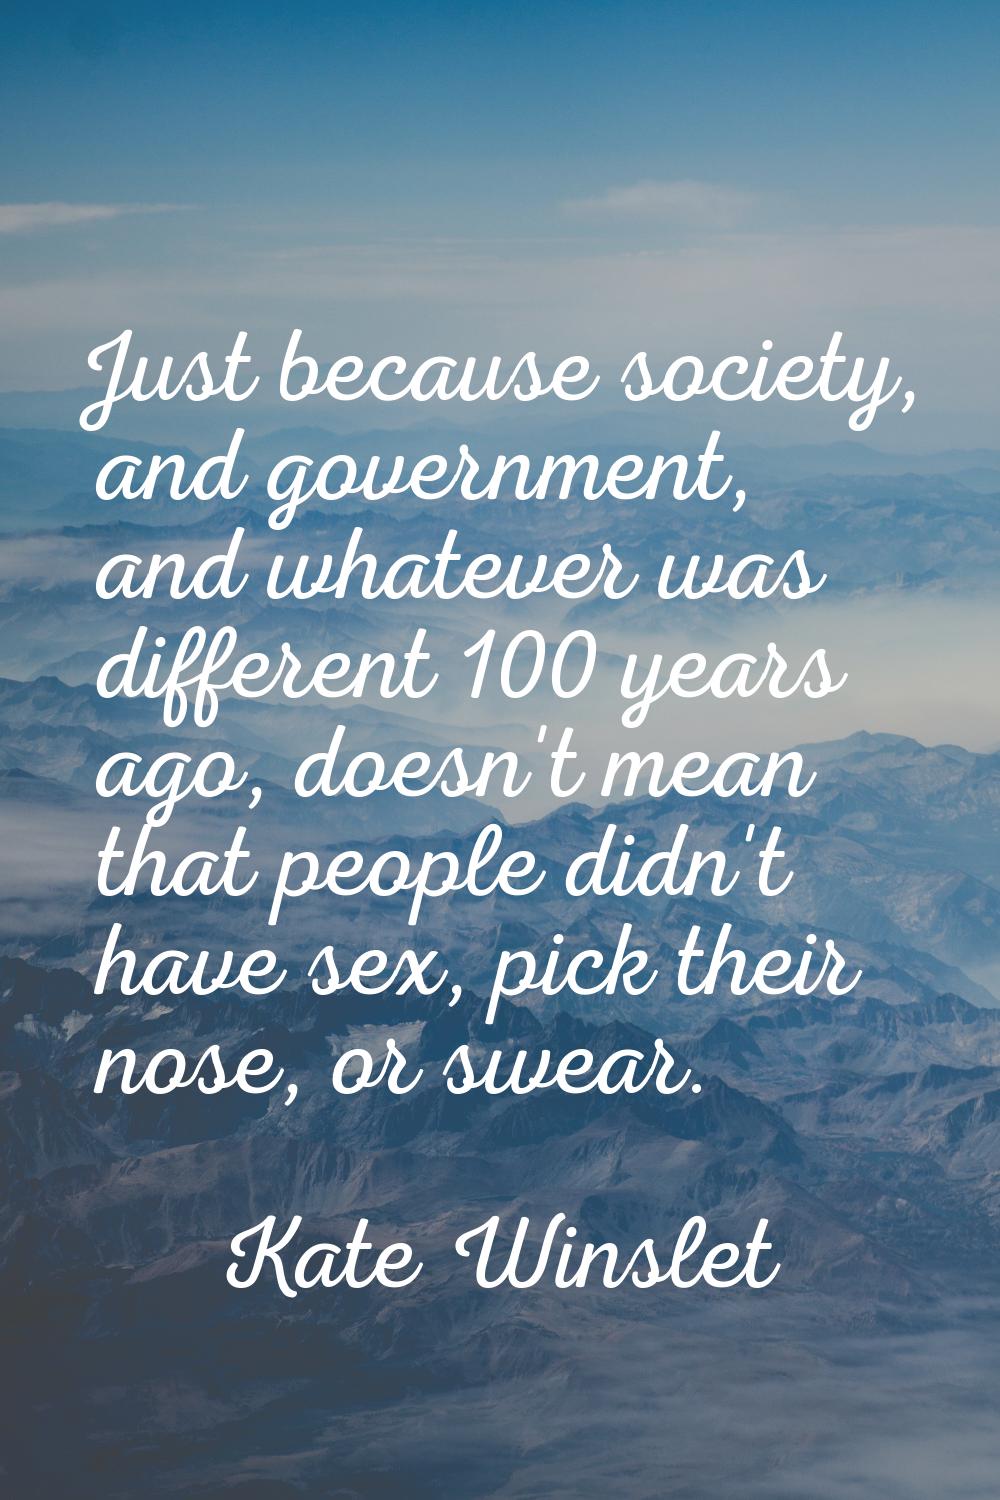 Just because society, and government, and whatever was different 100 years ago, doesn't mean that p